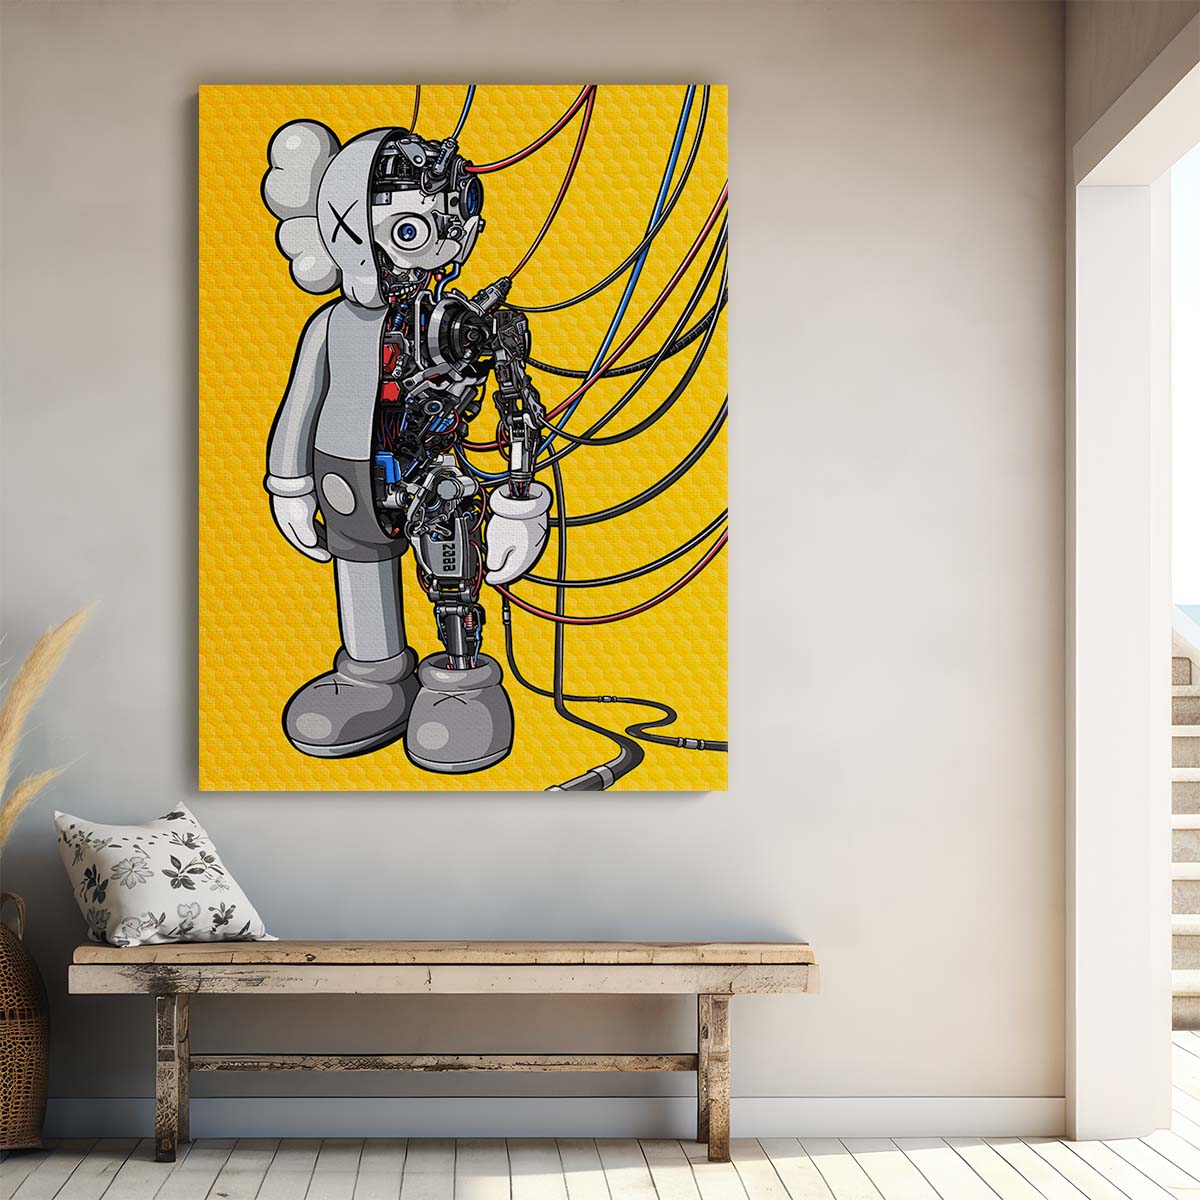 Hypebeast Kaws Robot Android Cartoon Wall Art by Luxuriance Designs. Made in USA.